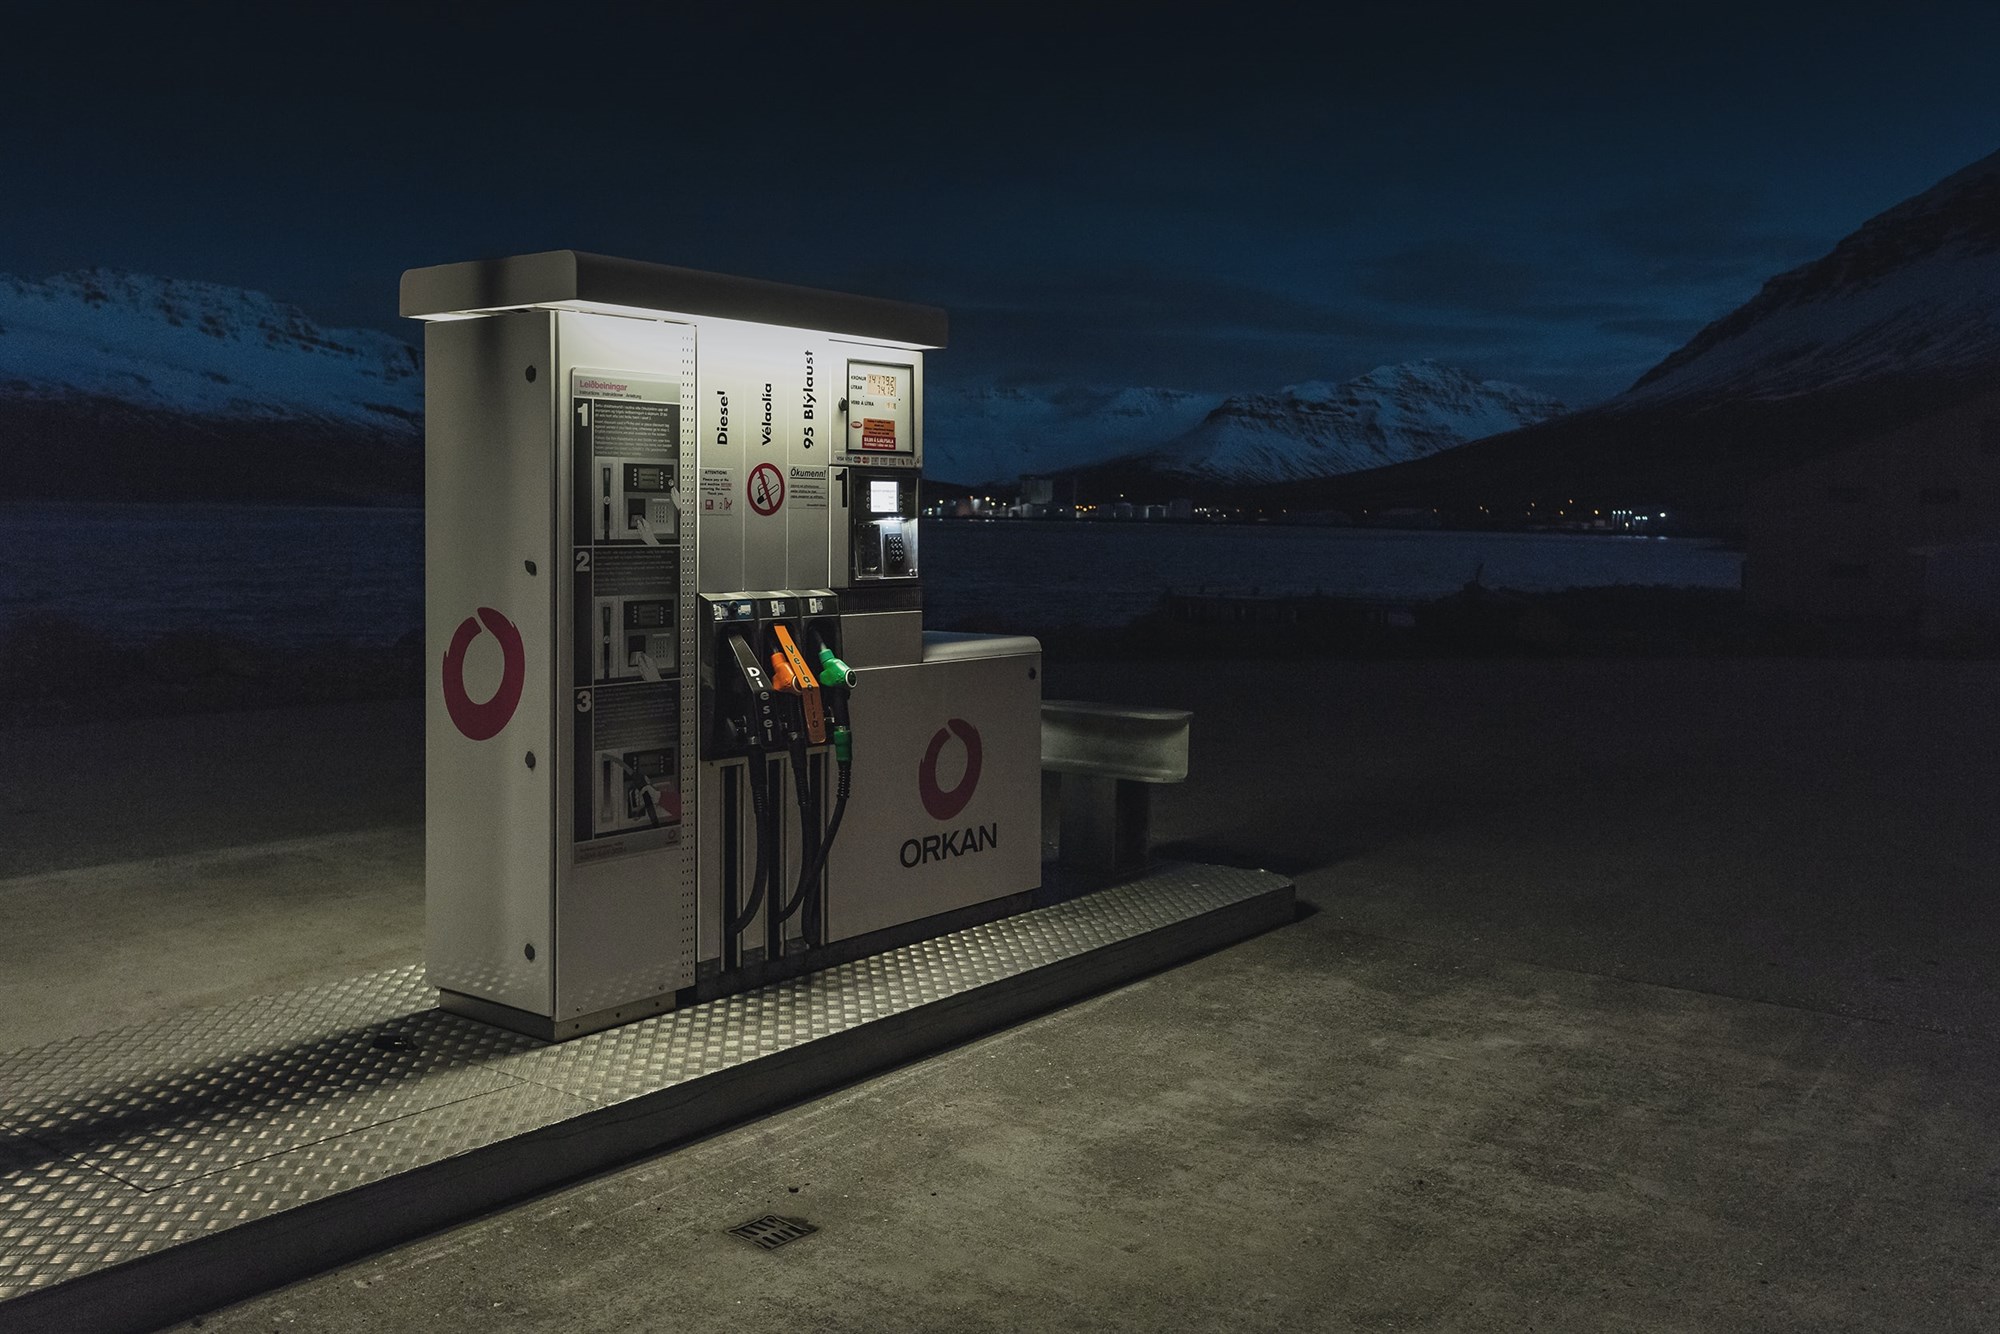 Self service petrol station in Iceland at night